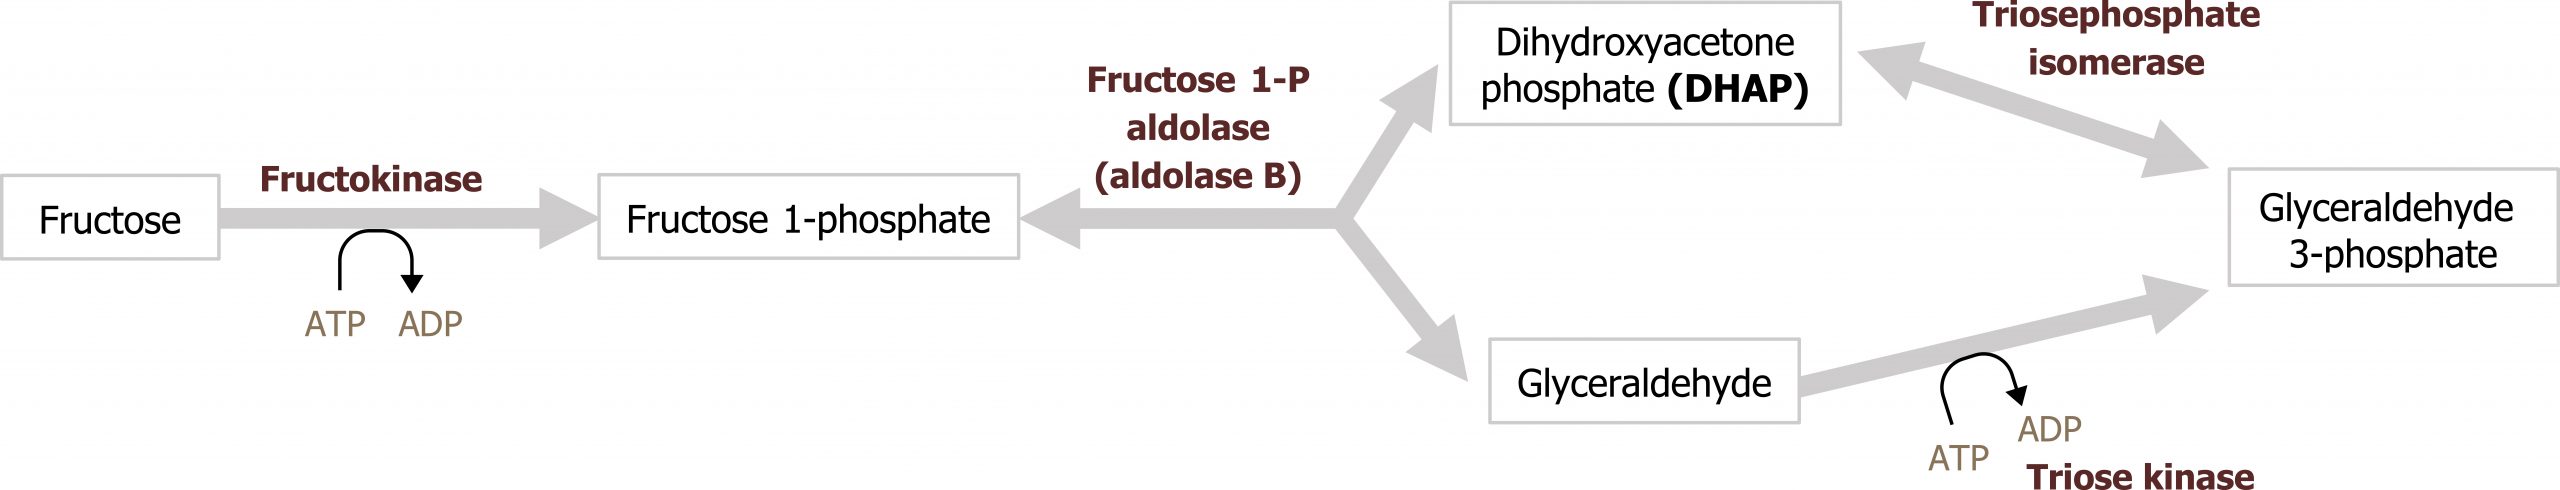 Fructose arrow with ATP arrow ADP and enzyme fructokinase to Fructose 1-phosphate bidirectional branched arrows enzyme fructose 1-P aldolase (aldolase B) to dihydroxyacetone phosphate (DHAP) and glyceraldehyde. DHAP bidirectional arrow enzyme triosephosphate isomerase to glyceraldehyde 3-phosphate. Glyceraldehyde arrow with ATP arrow ADP and enzyme triose kinase to glyceraldehyde 3-phosphate.